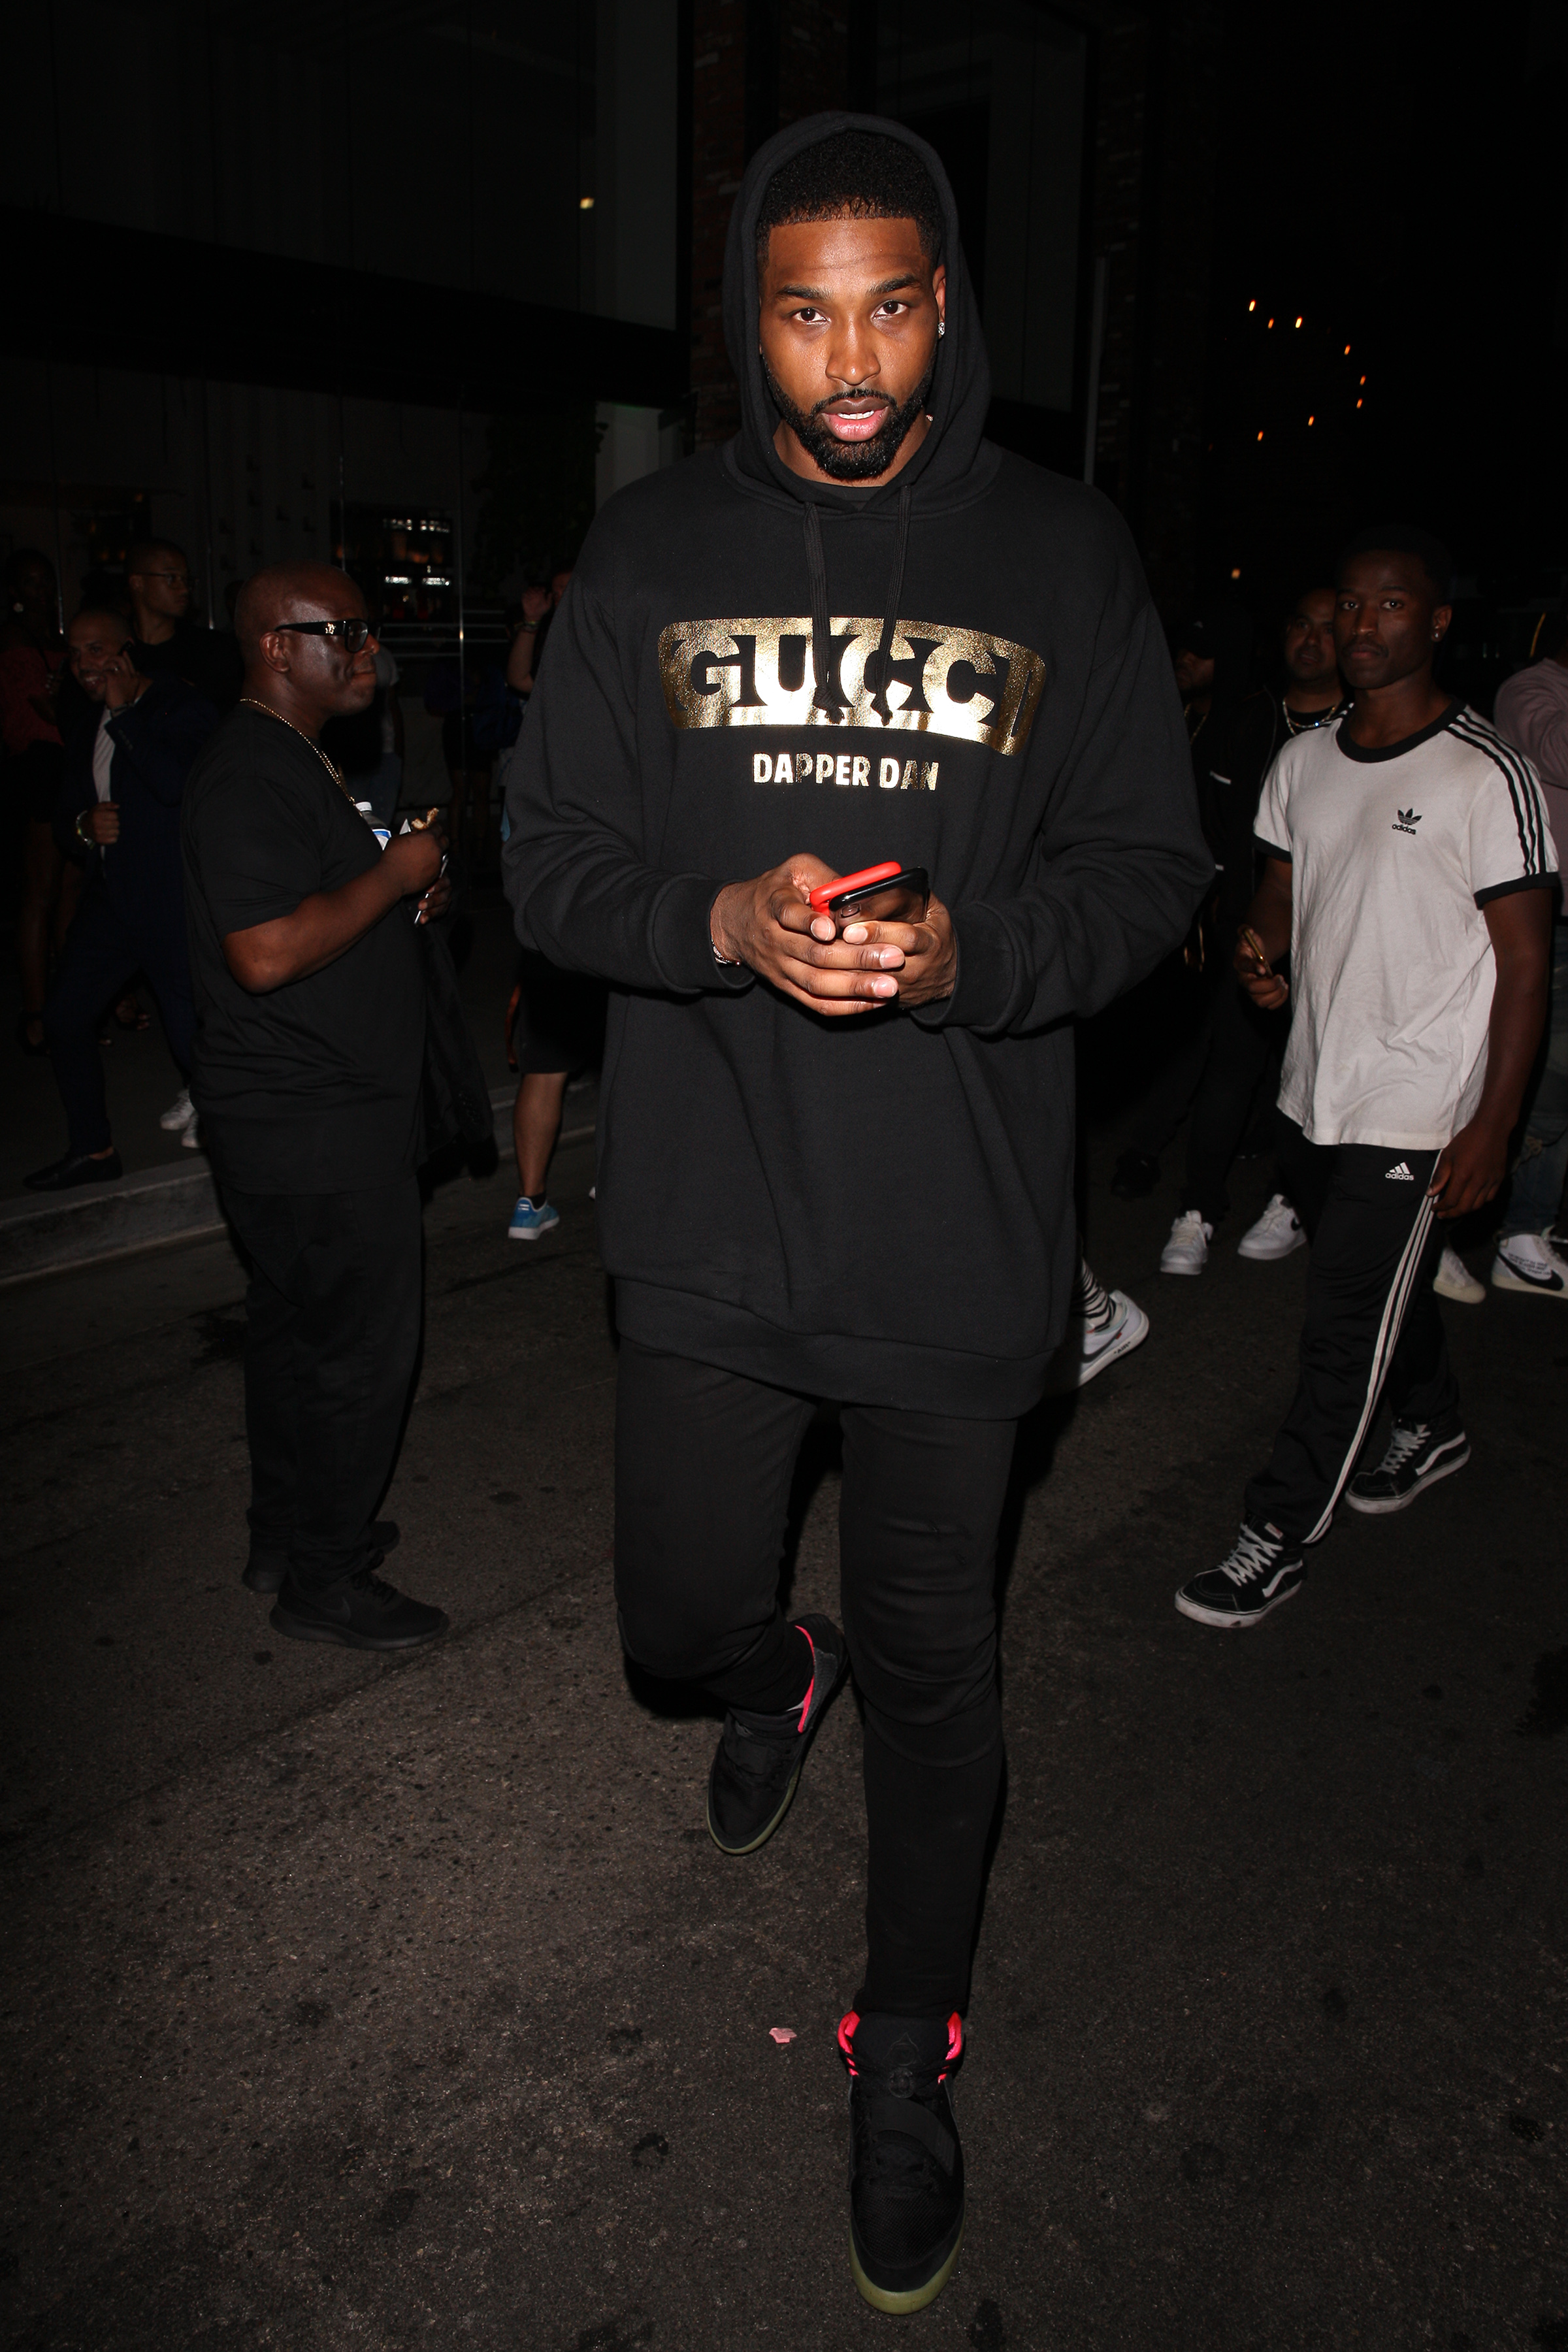 Tristan Thompson is spotted leaving Avenue night club without Khloe Kardashian in sight in Hollywood. He was partying inside the club with his friends, LeBron James, Draymond Green, Drake, Kevin Durant, Ben Simmons and Joel Embiid.